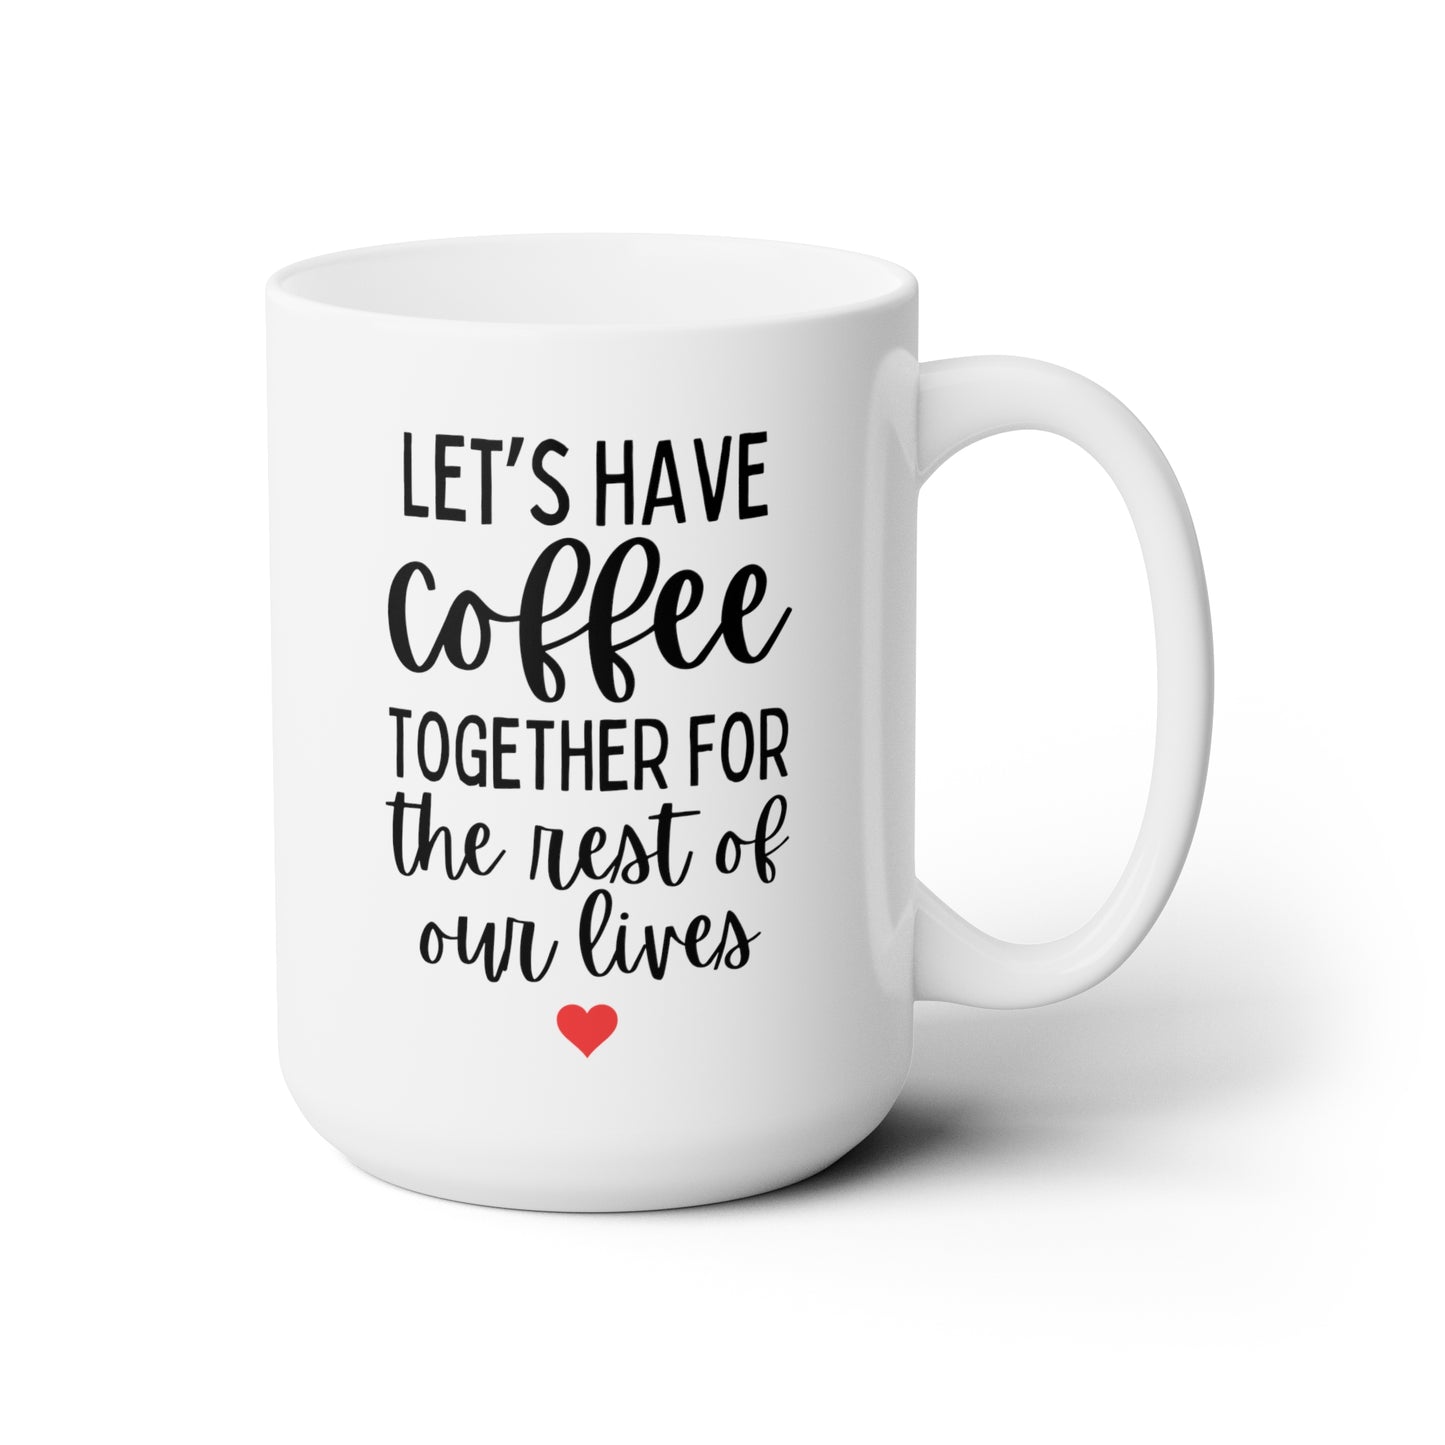 Let's Have Coffee Together For The Rest Of Our Lives 15oz white funny large coffee mug gift for couple engagement proposal wedding engaged marriage waveywares wavey wares wavywares wavy wares